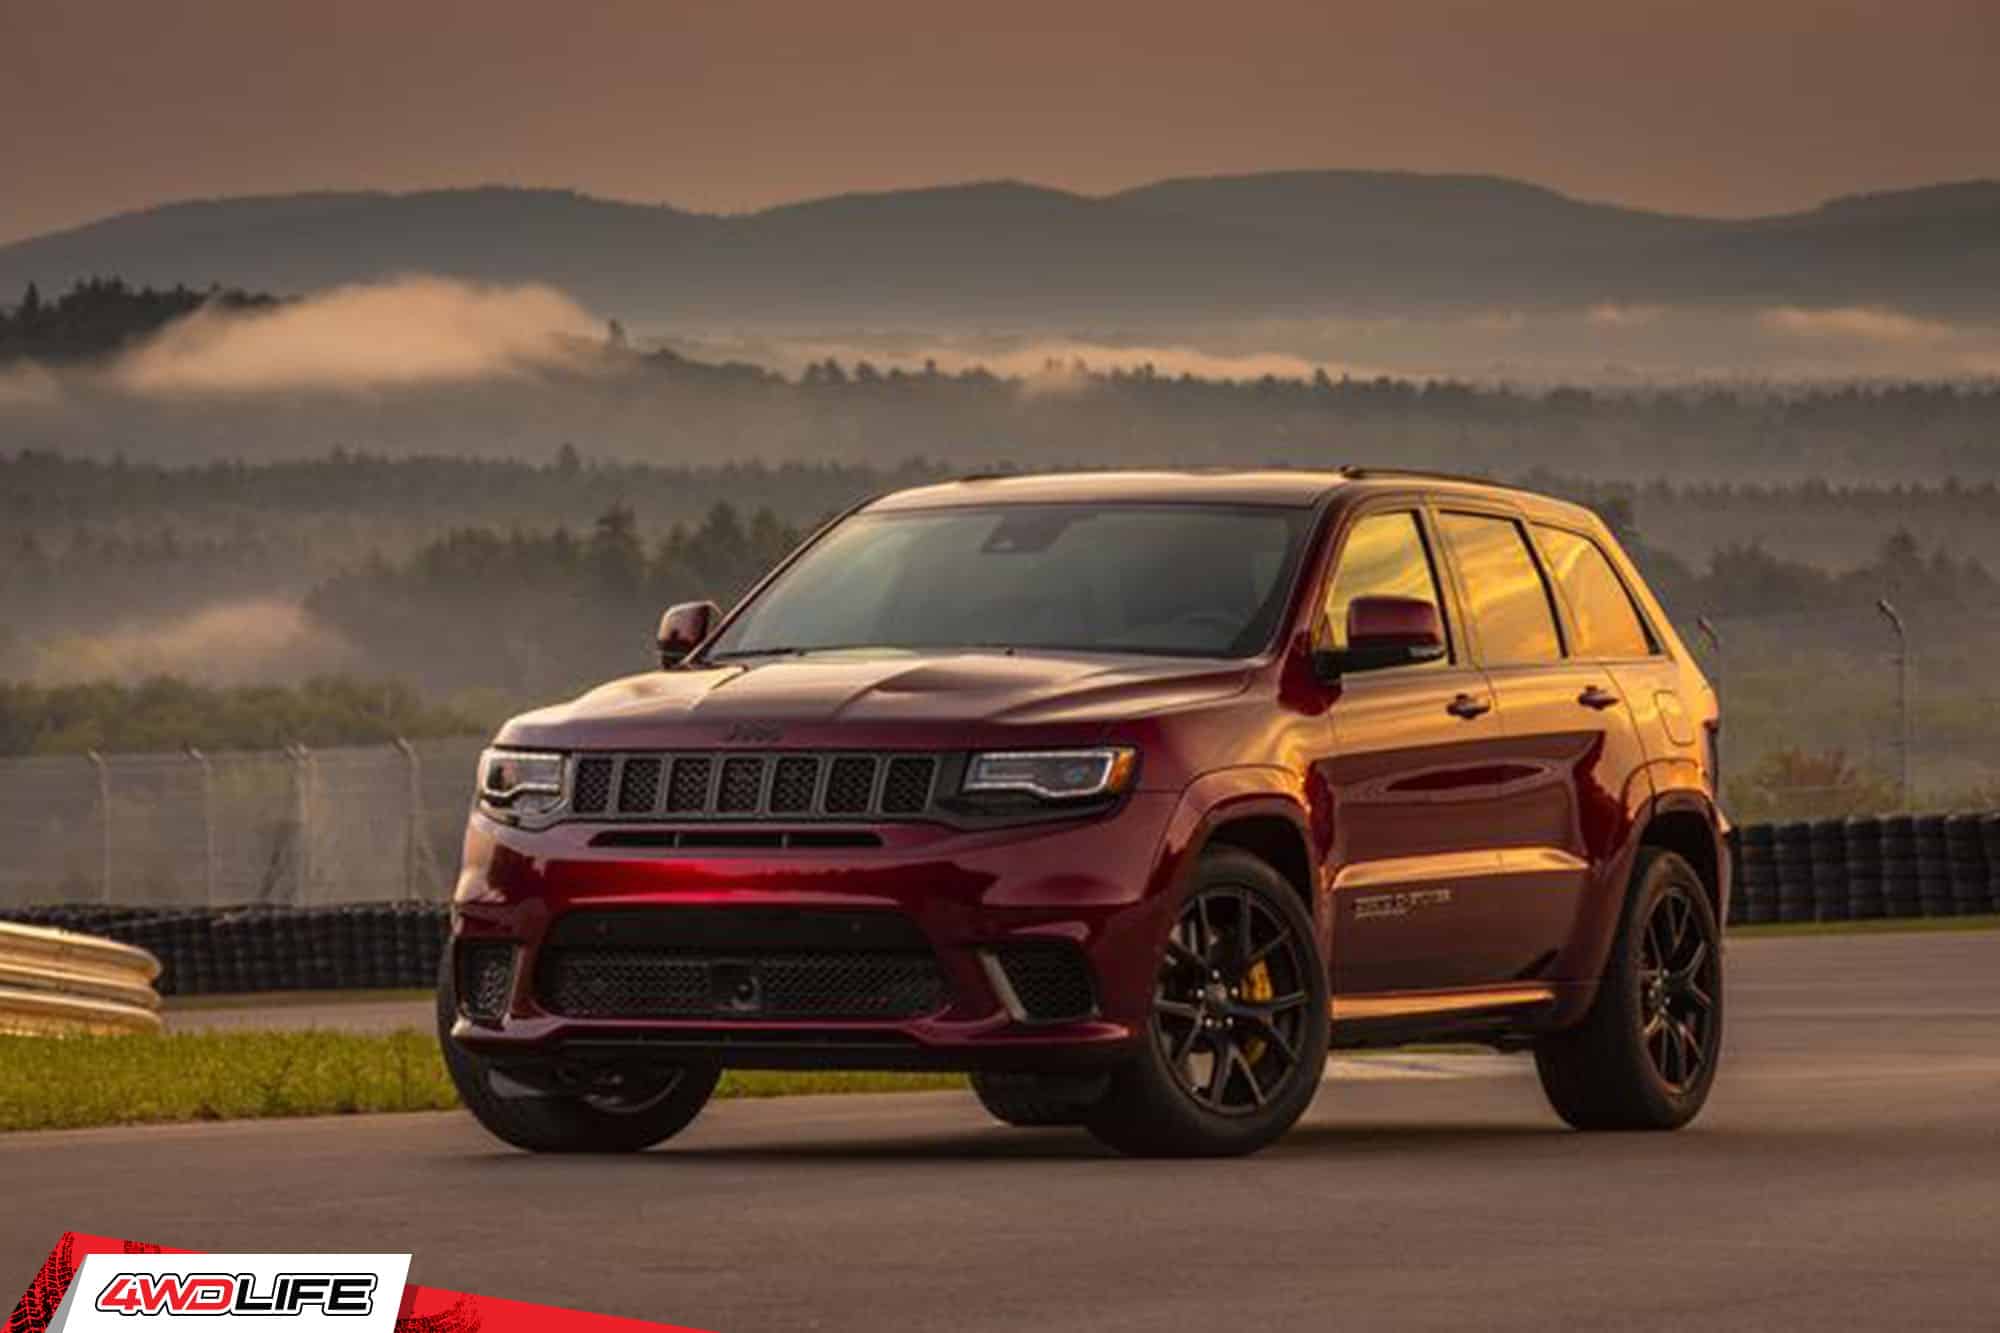 Quick Guide to Jeep Grand Cherokee Trim Levels 4WD Life